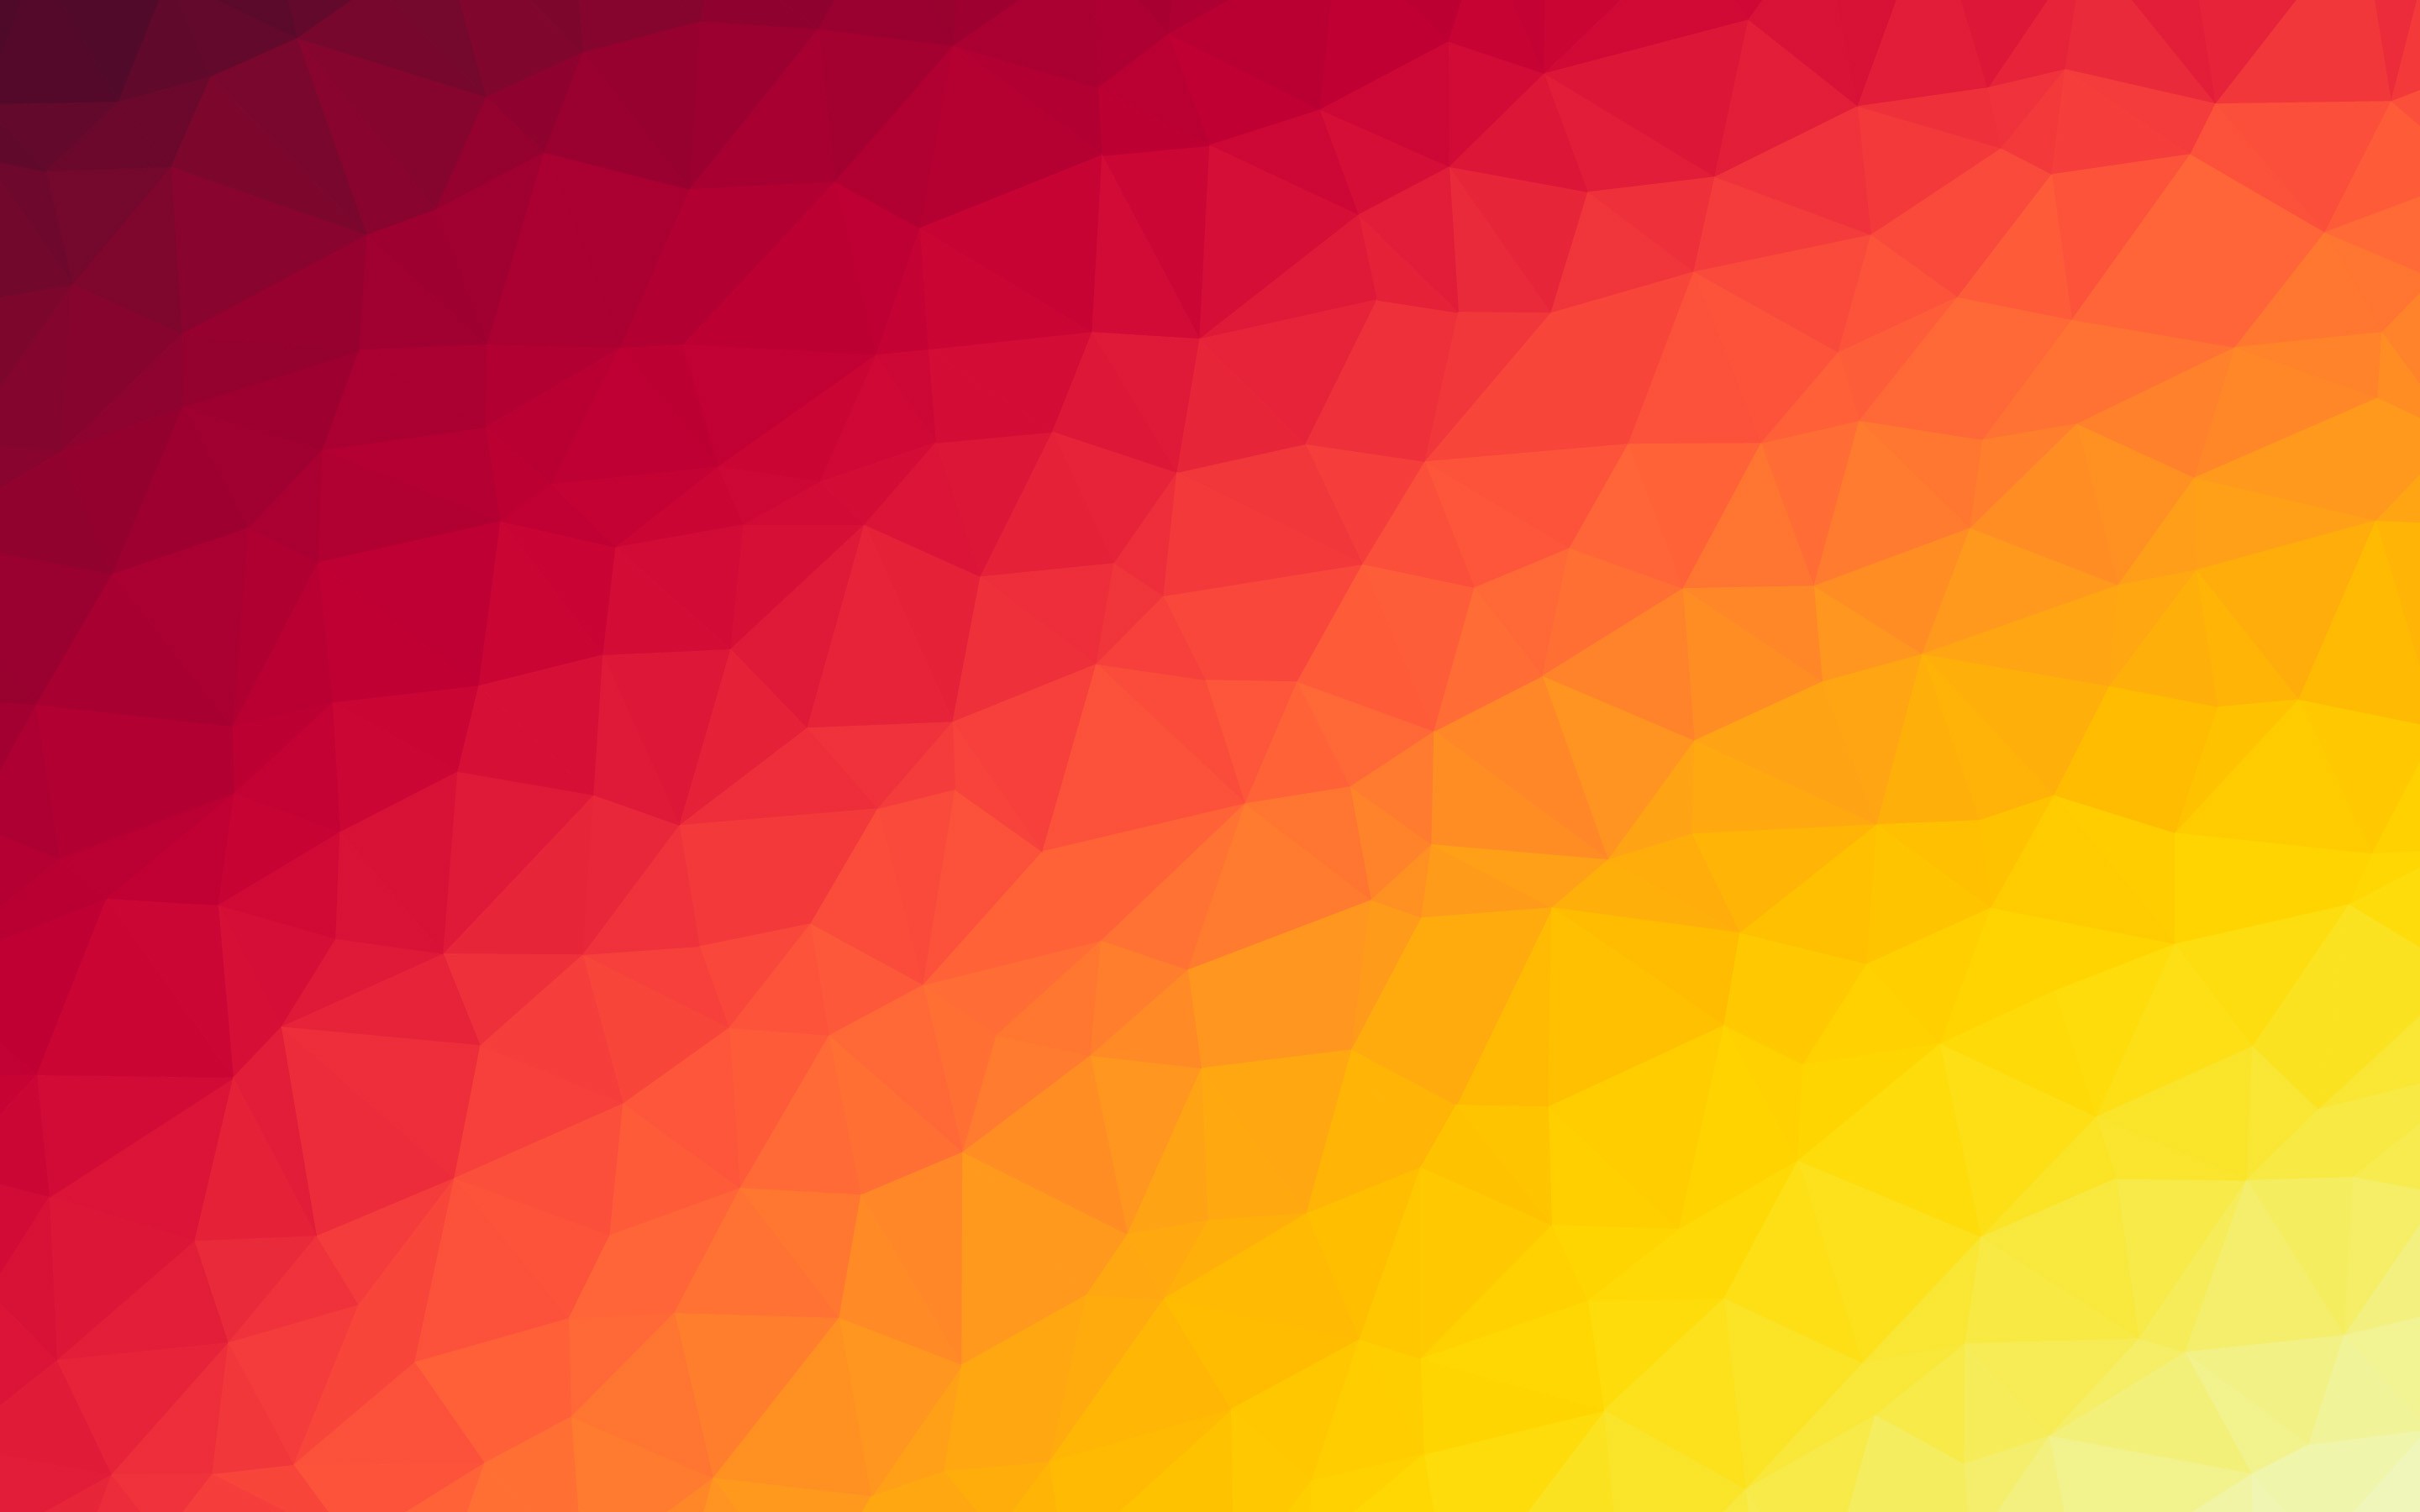 Colourful Html background image with red and yellow gradient shades with texture